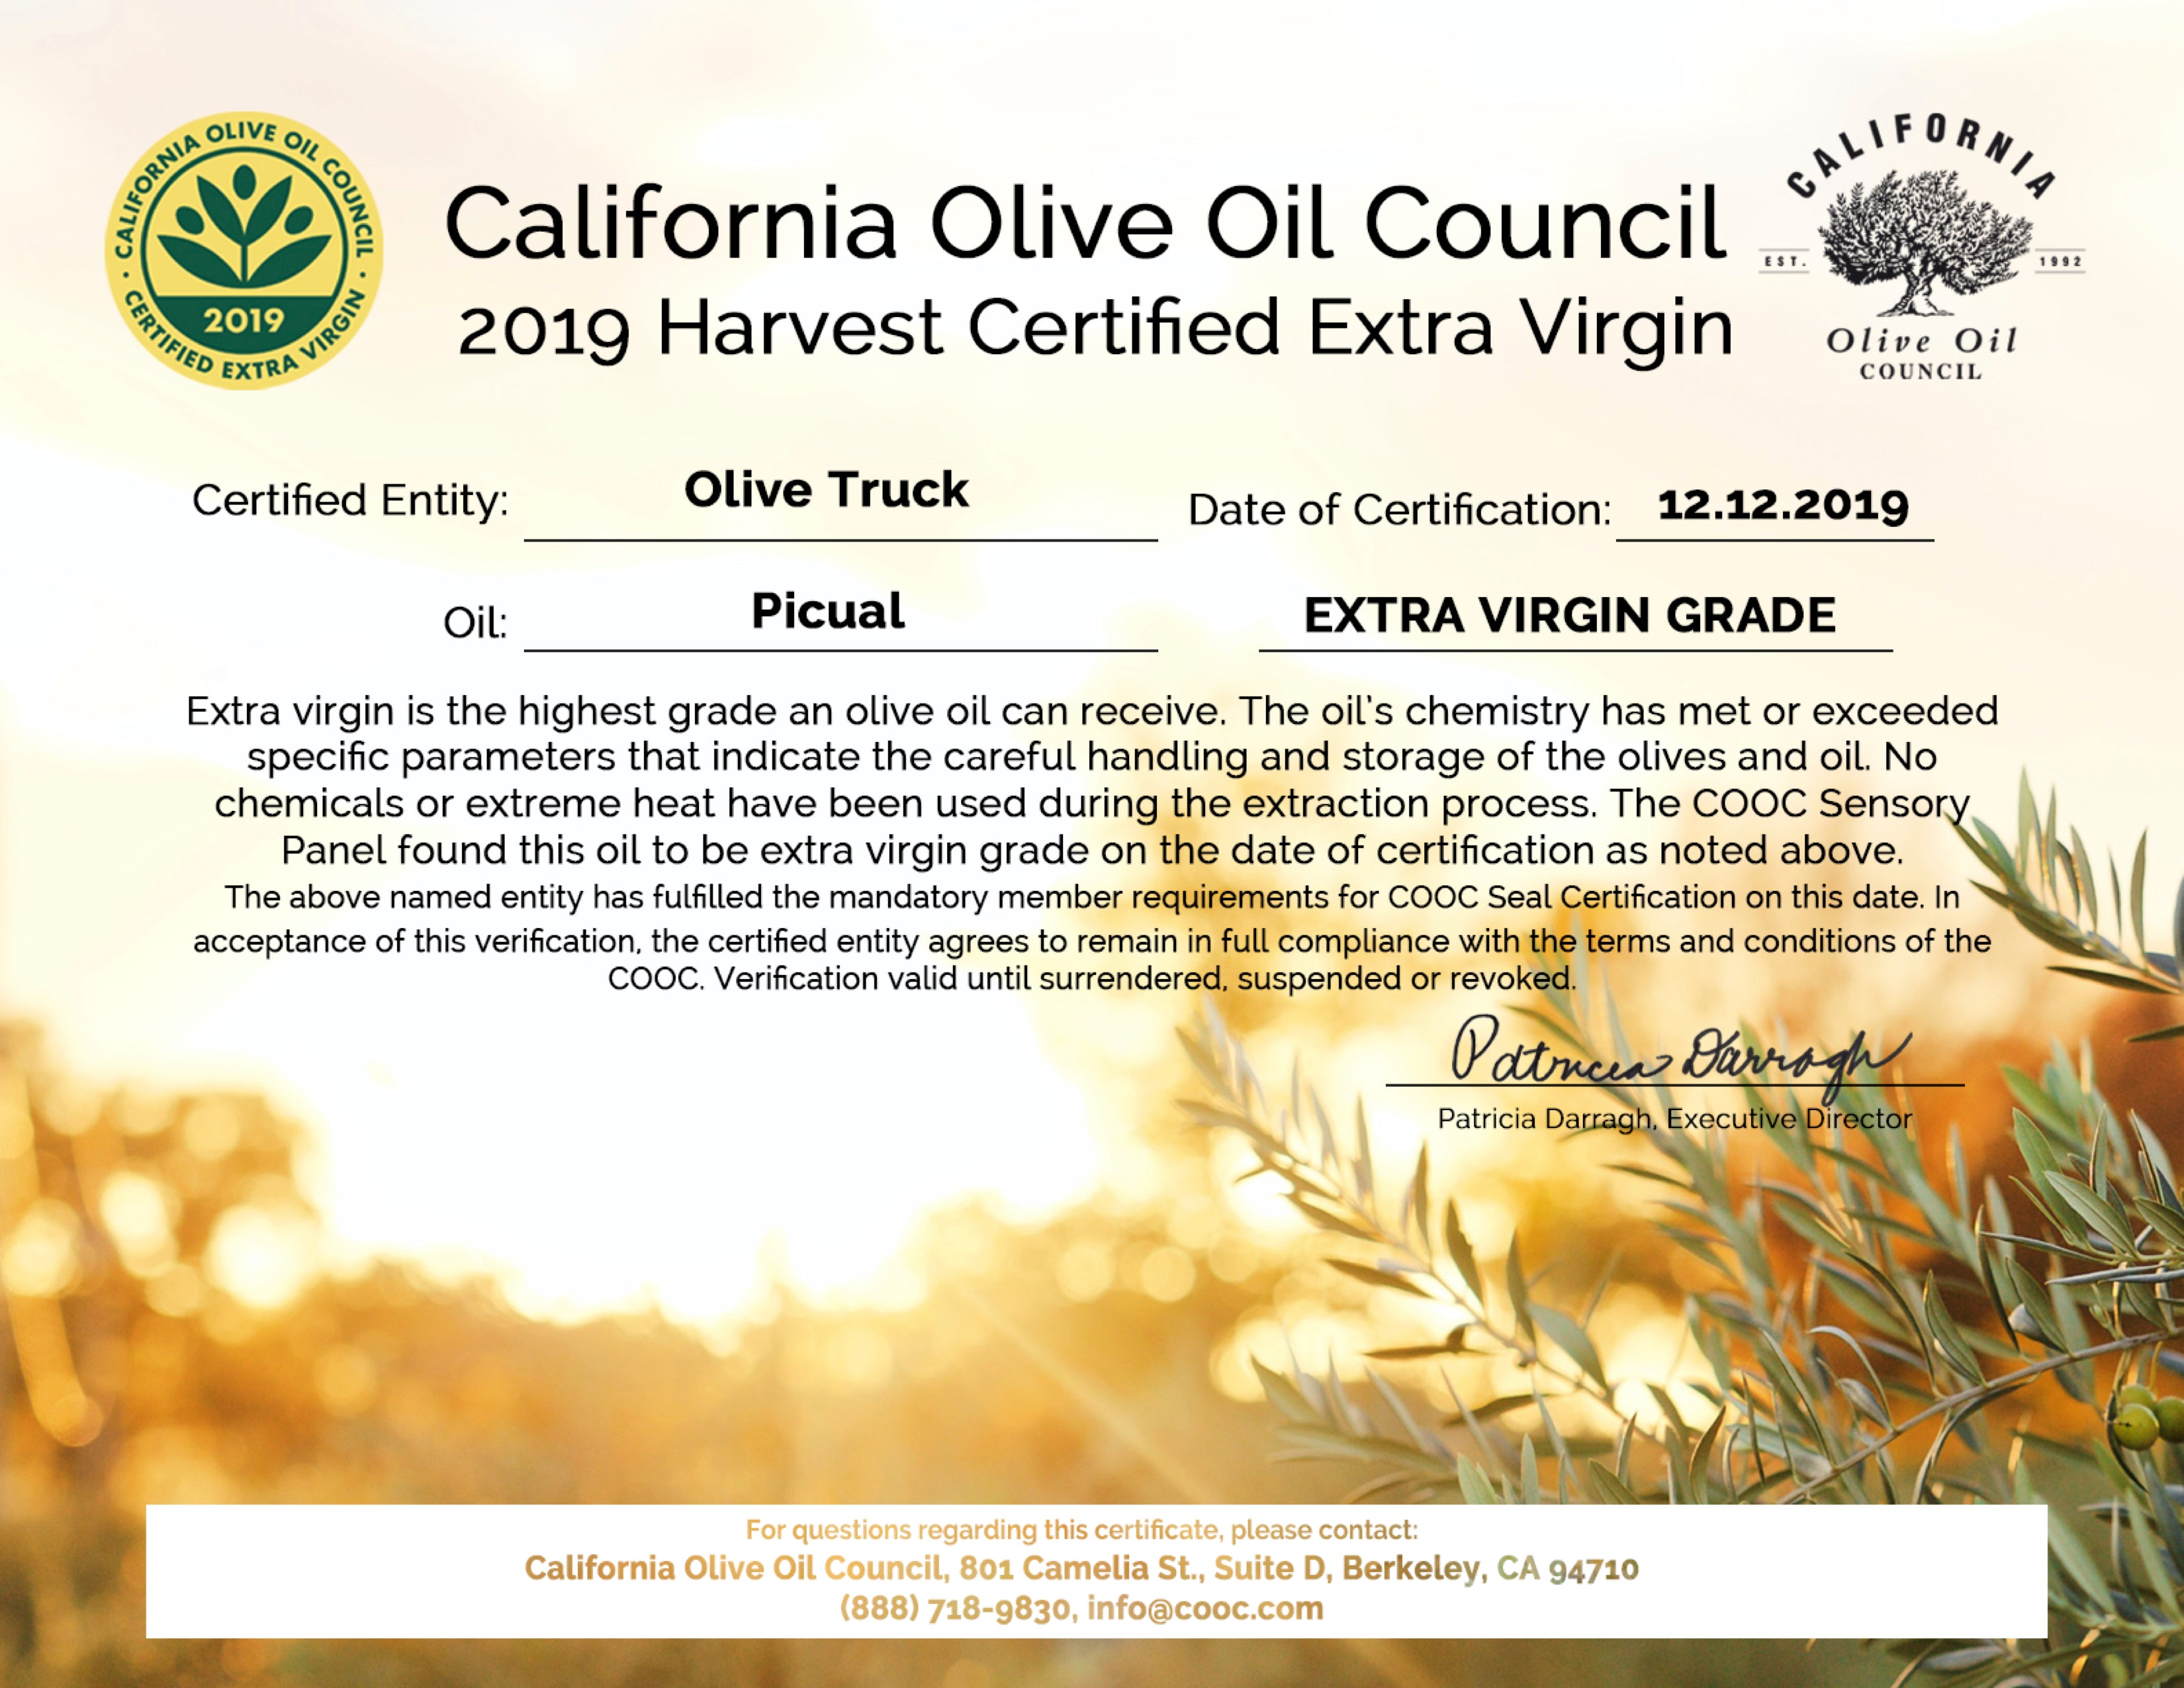 Picual - California Olive Oil Council, 2019 Harvest Certified Extra Virgin